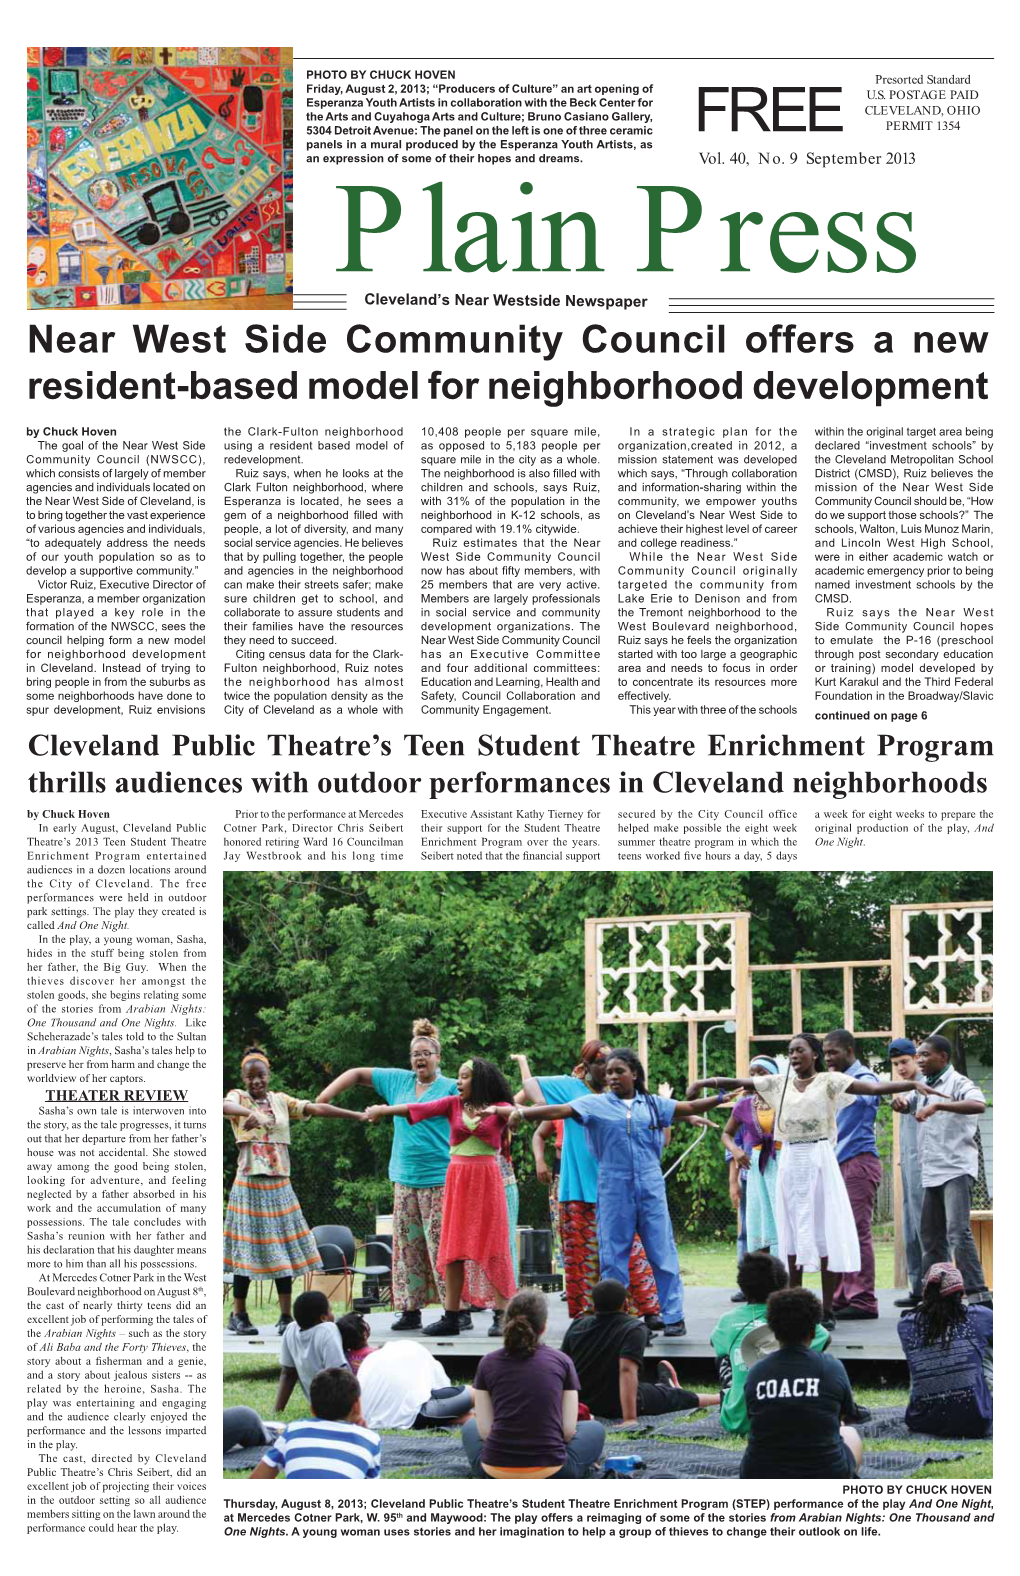 Near West Side Community Council Offers a New Resident-Based Model for Neighborhood Development